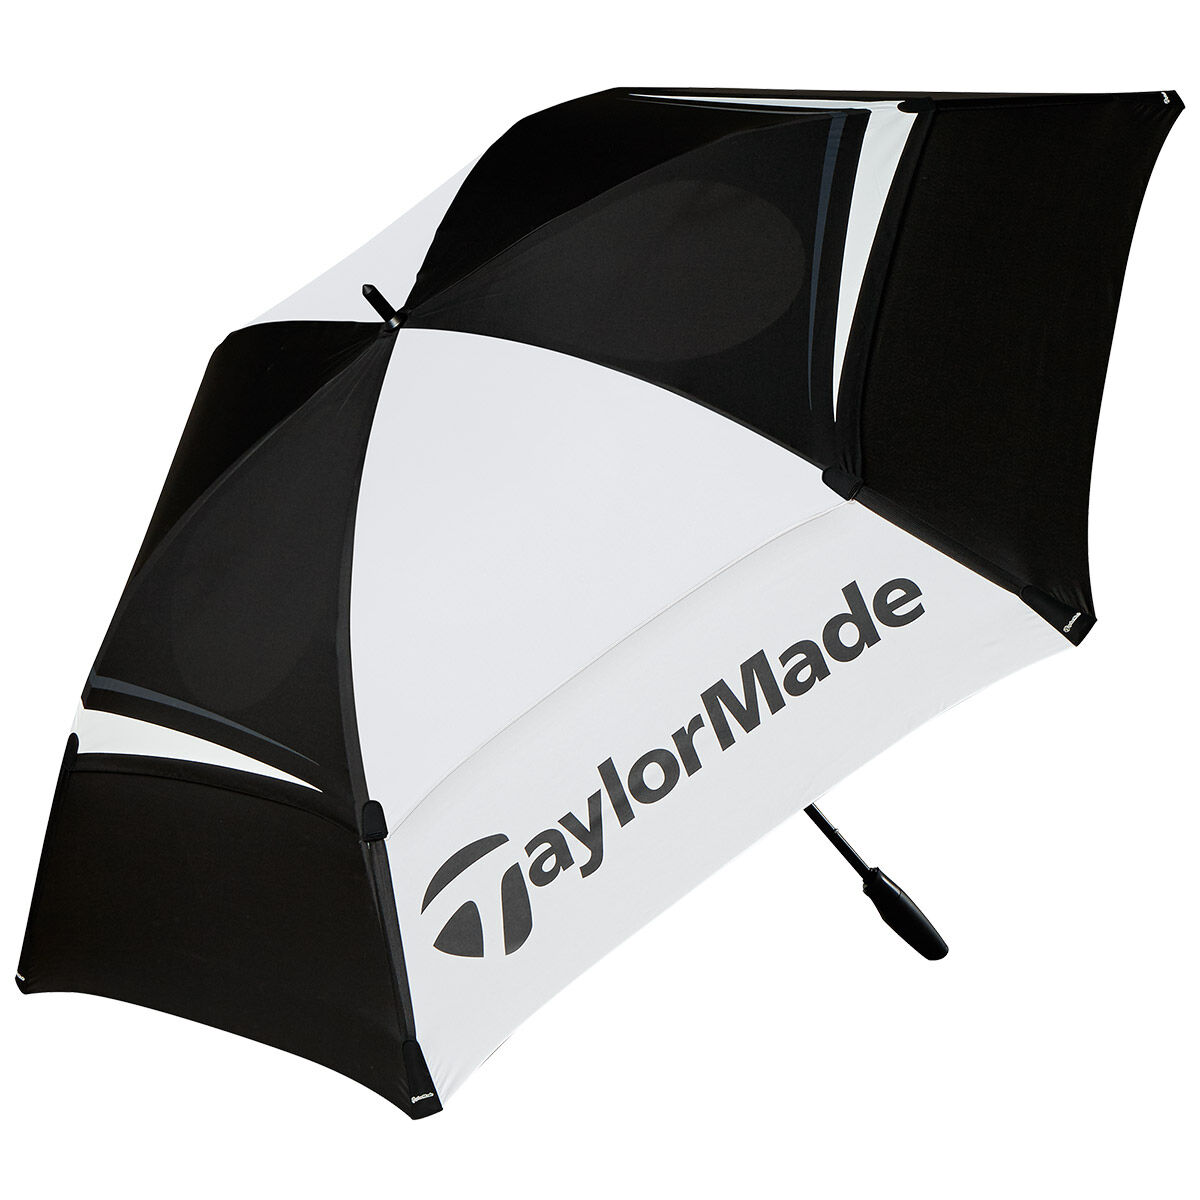 TaylorMade 68"" Double Canopy Golf Umbrella, Mens, Black/white, 68 inches | American Golf